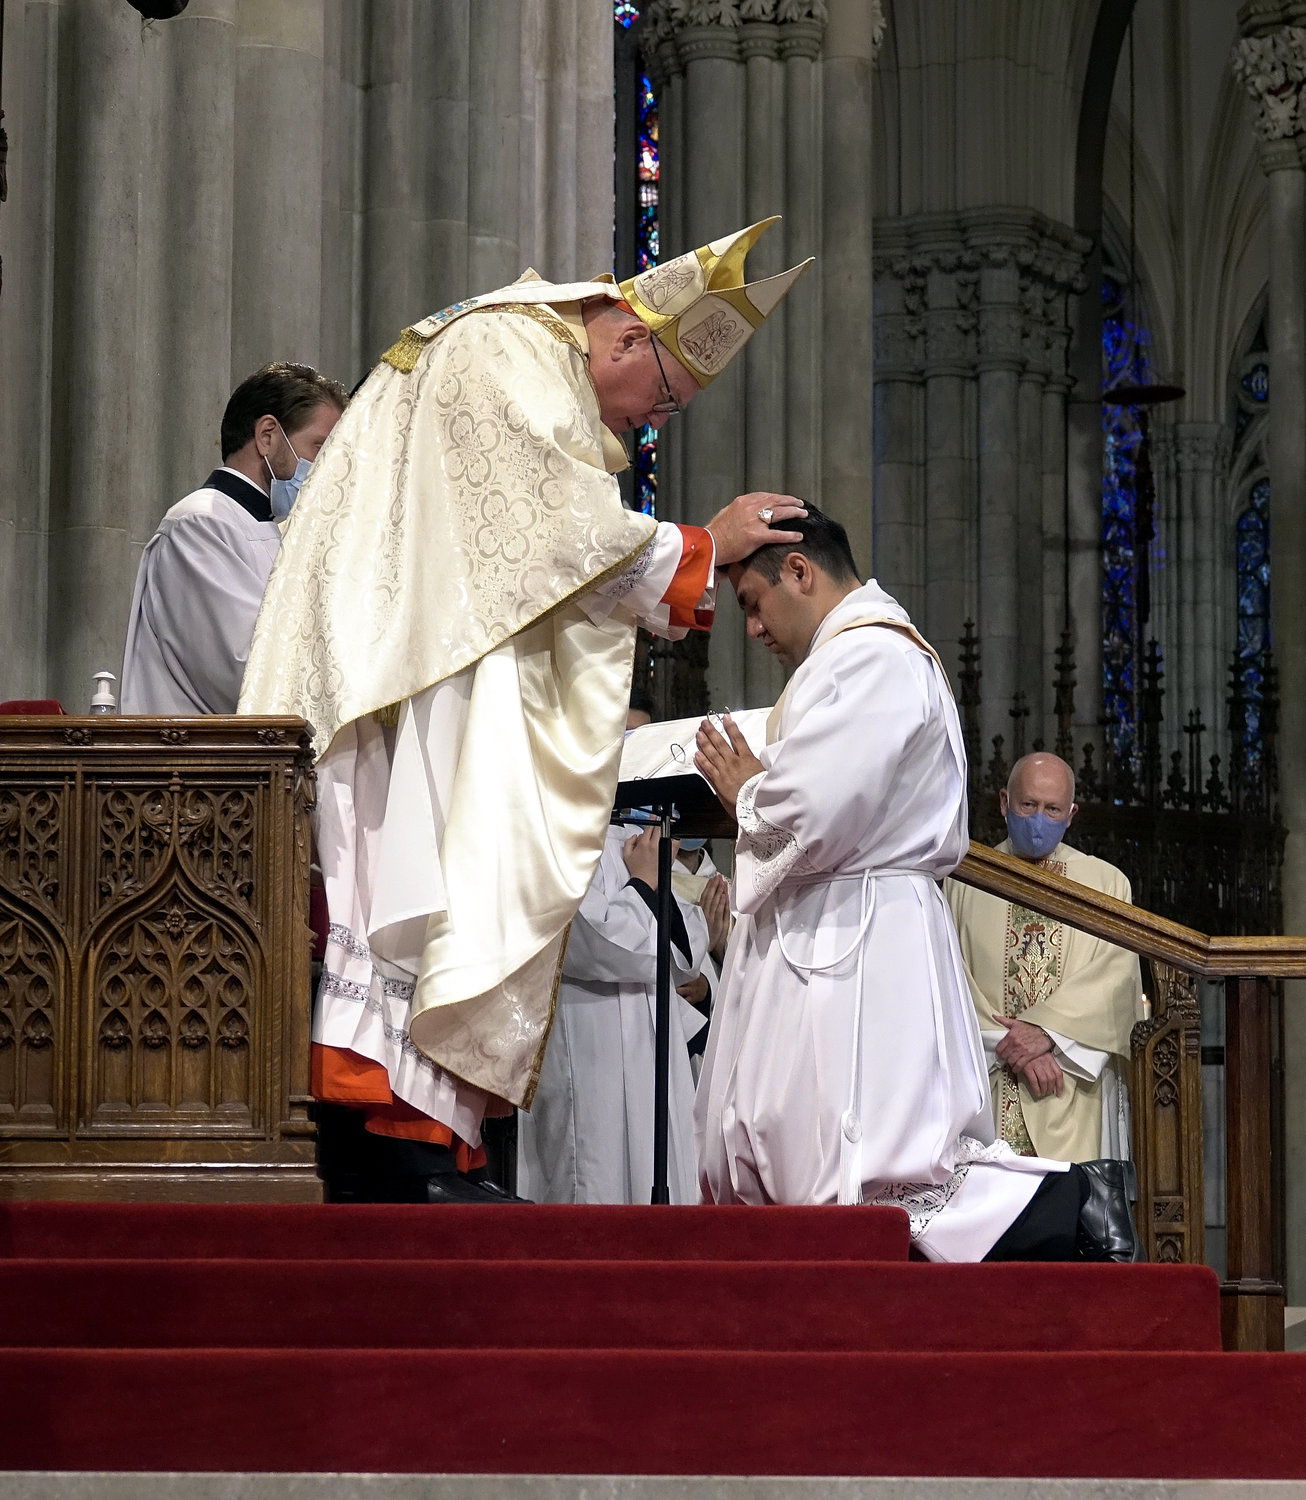 Cardinal Dolan lays hands on Father Luis Silva during the Rite of Ordination.